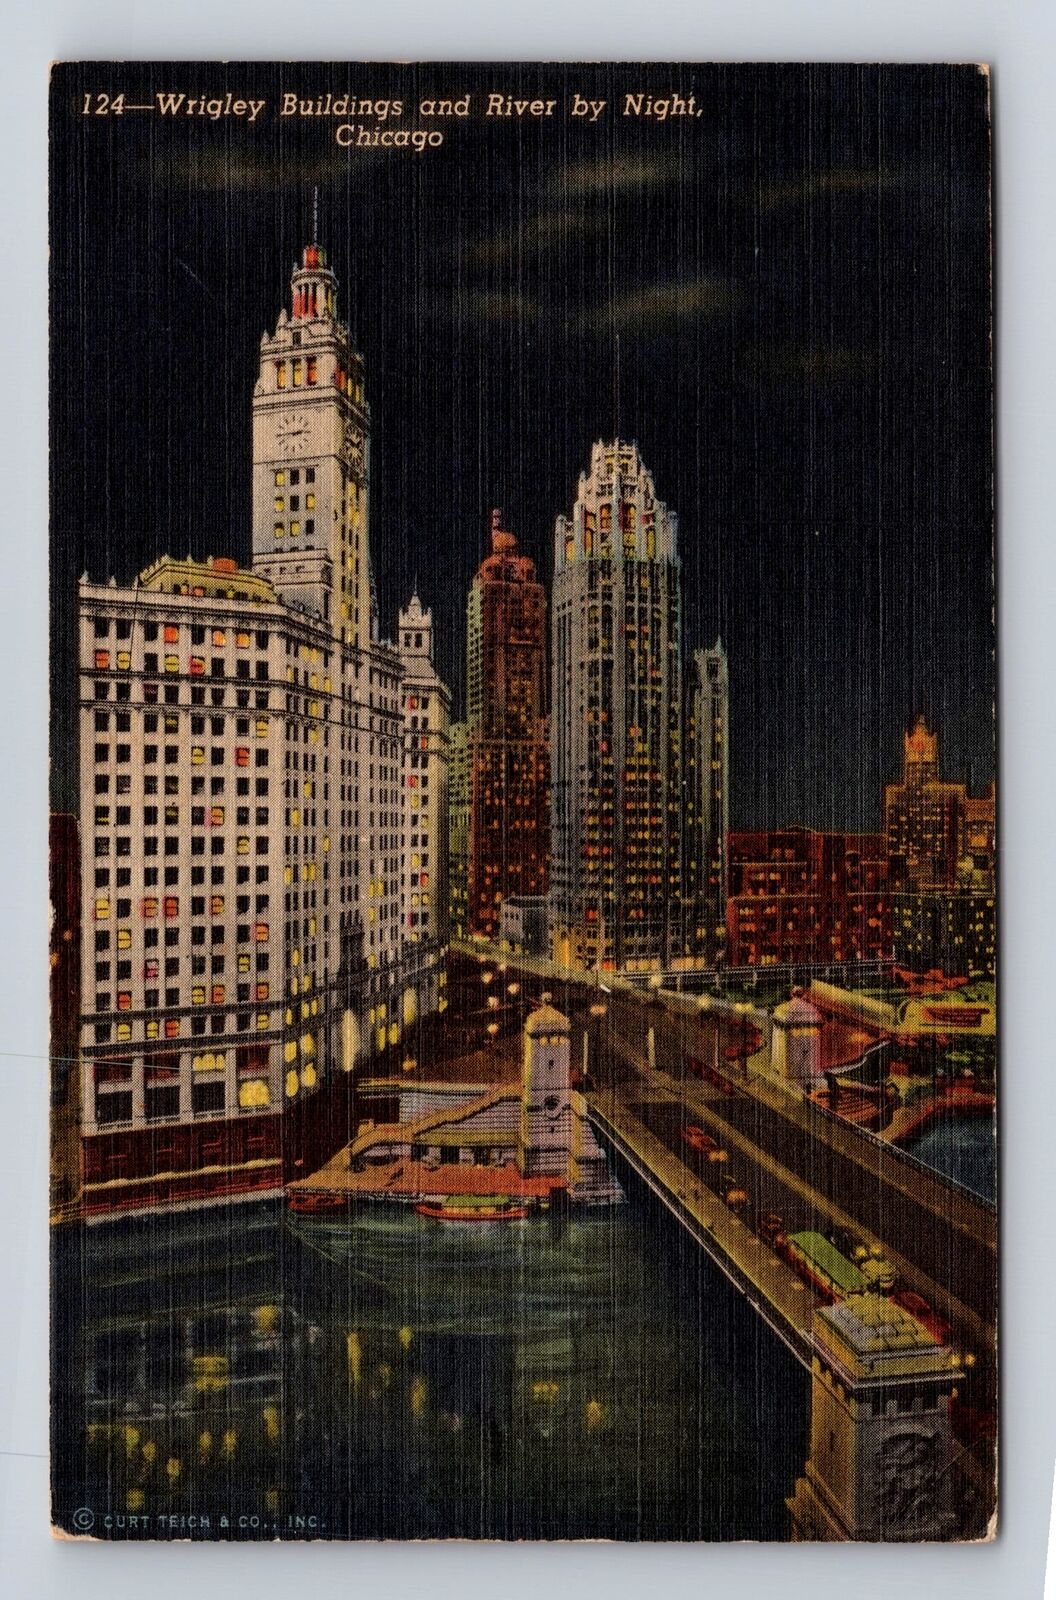 Chicago IL-Illinois, Wrigley Buildings And River, Vintage c1953 Postcard